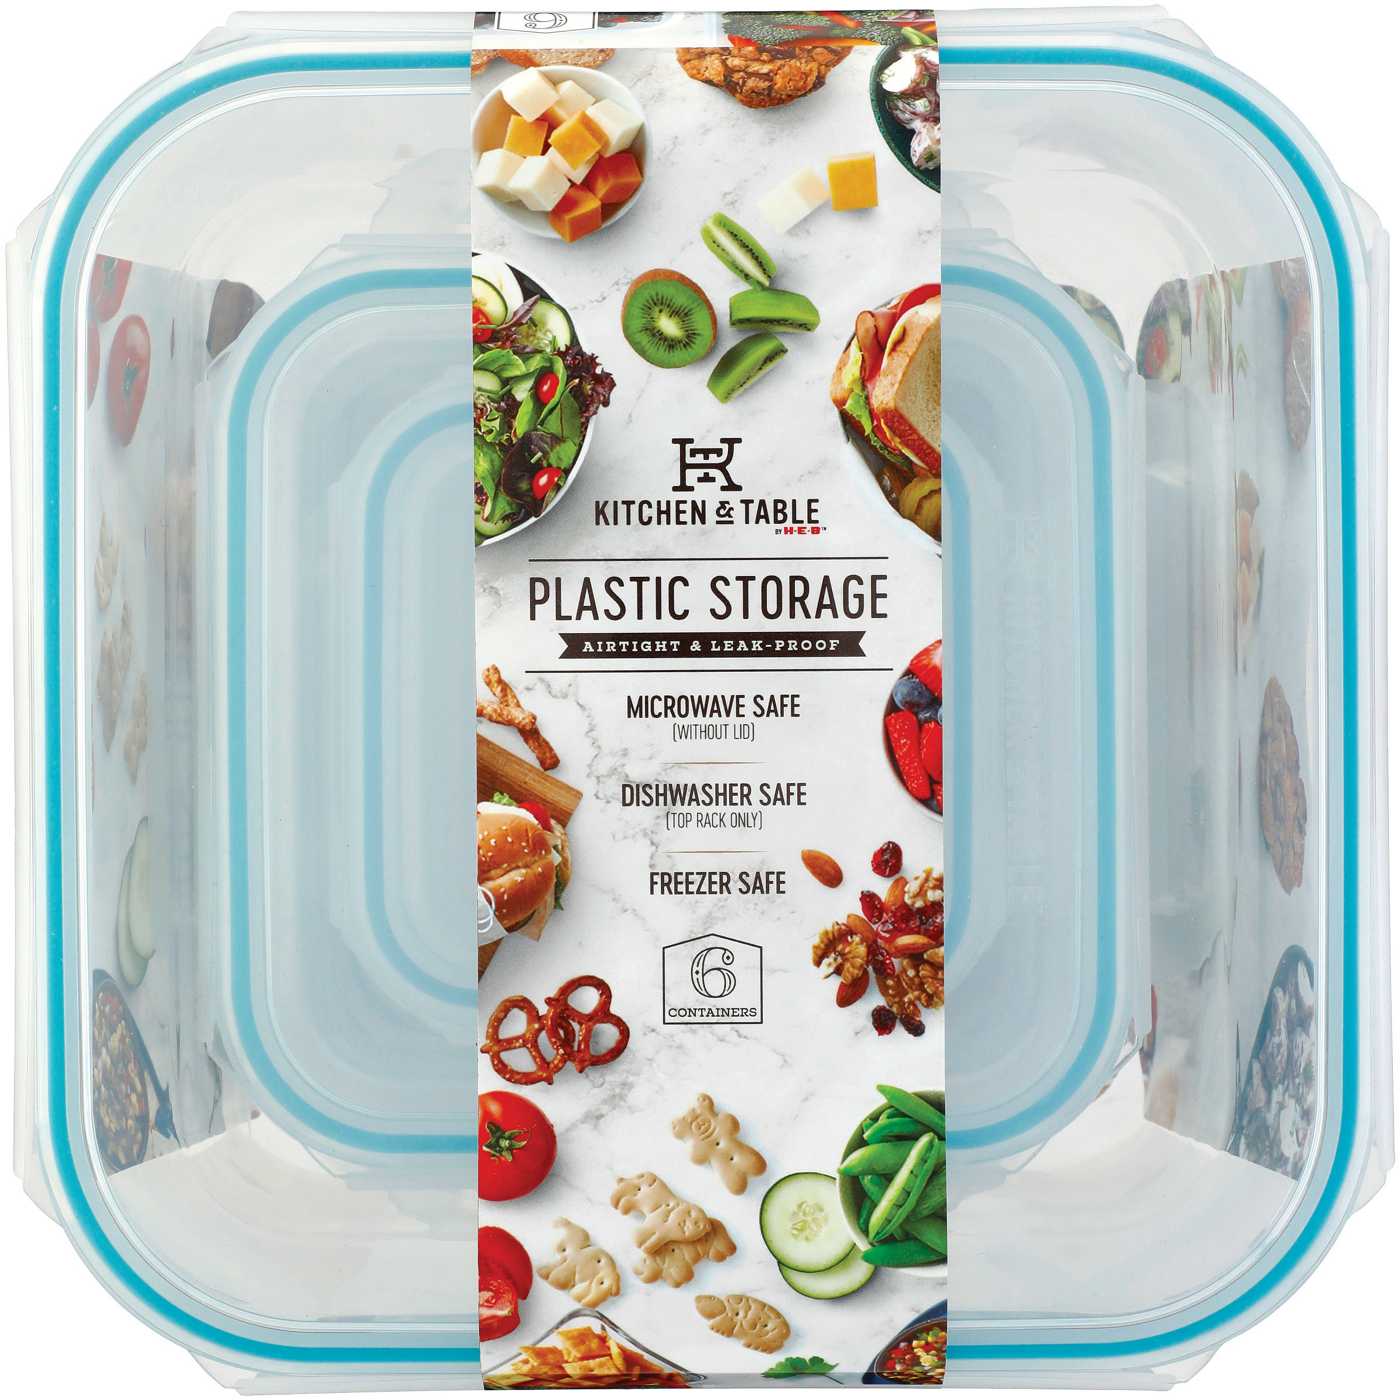 Snapware Glass Bpa-free Reusable Food Storage Container with Lid at